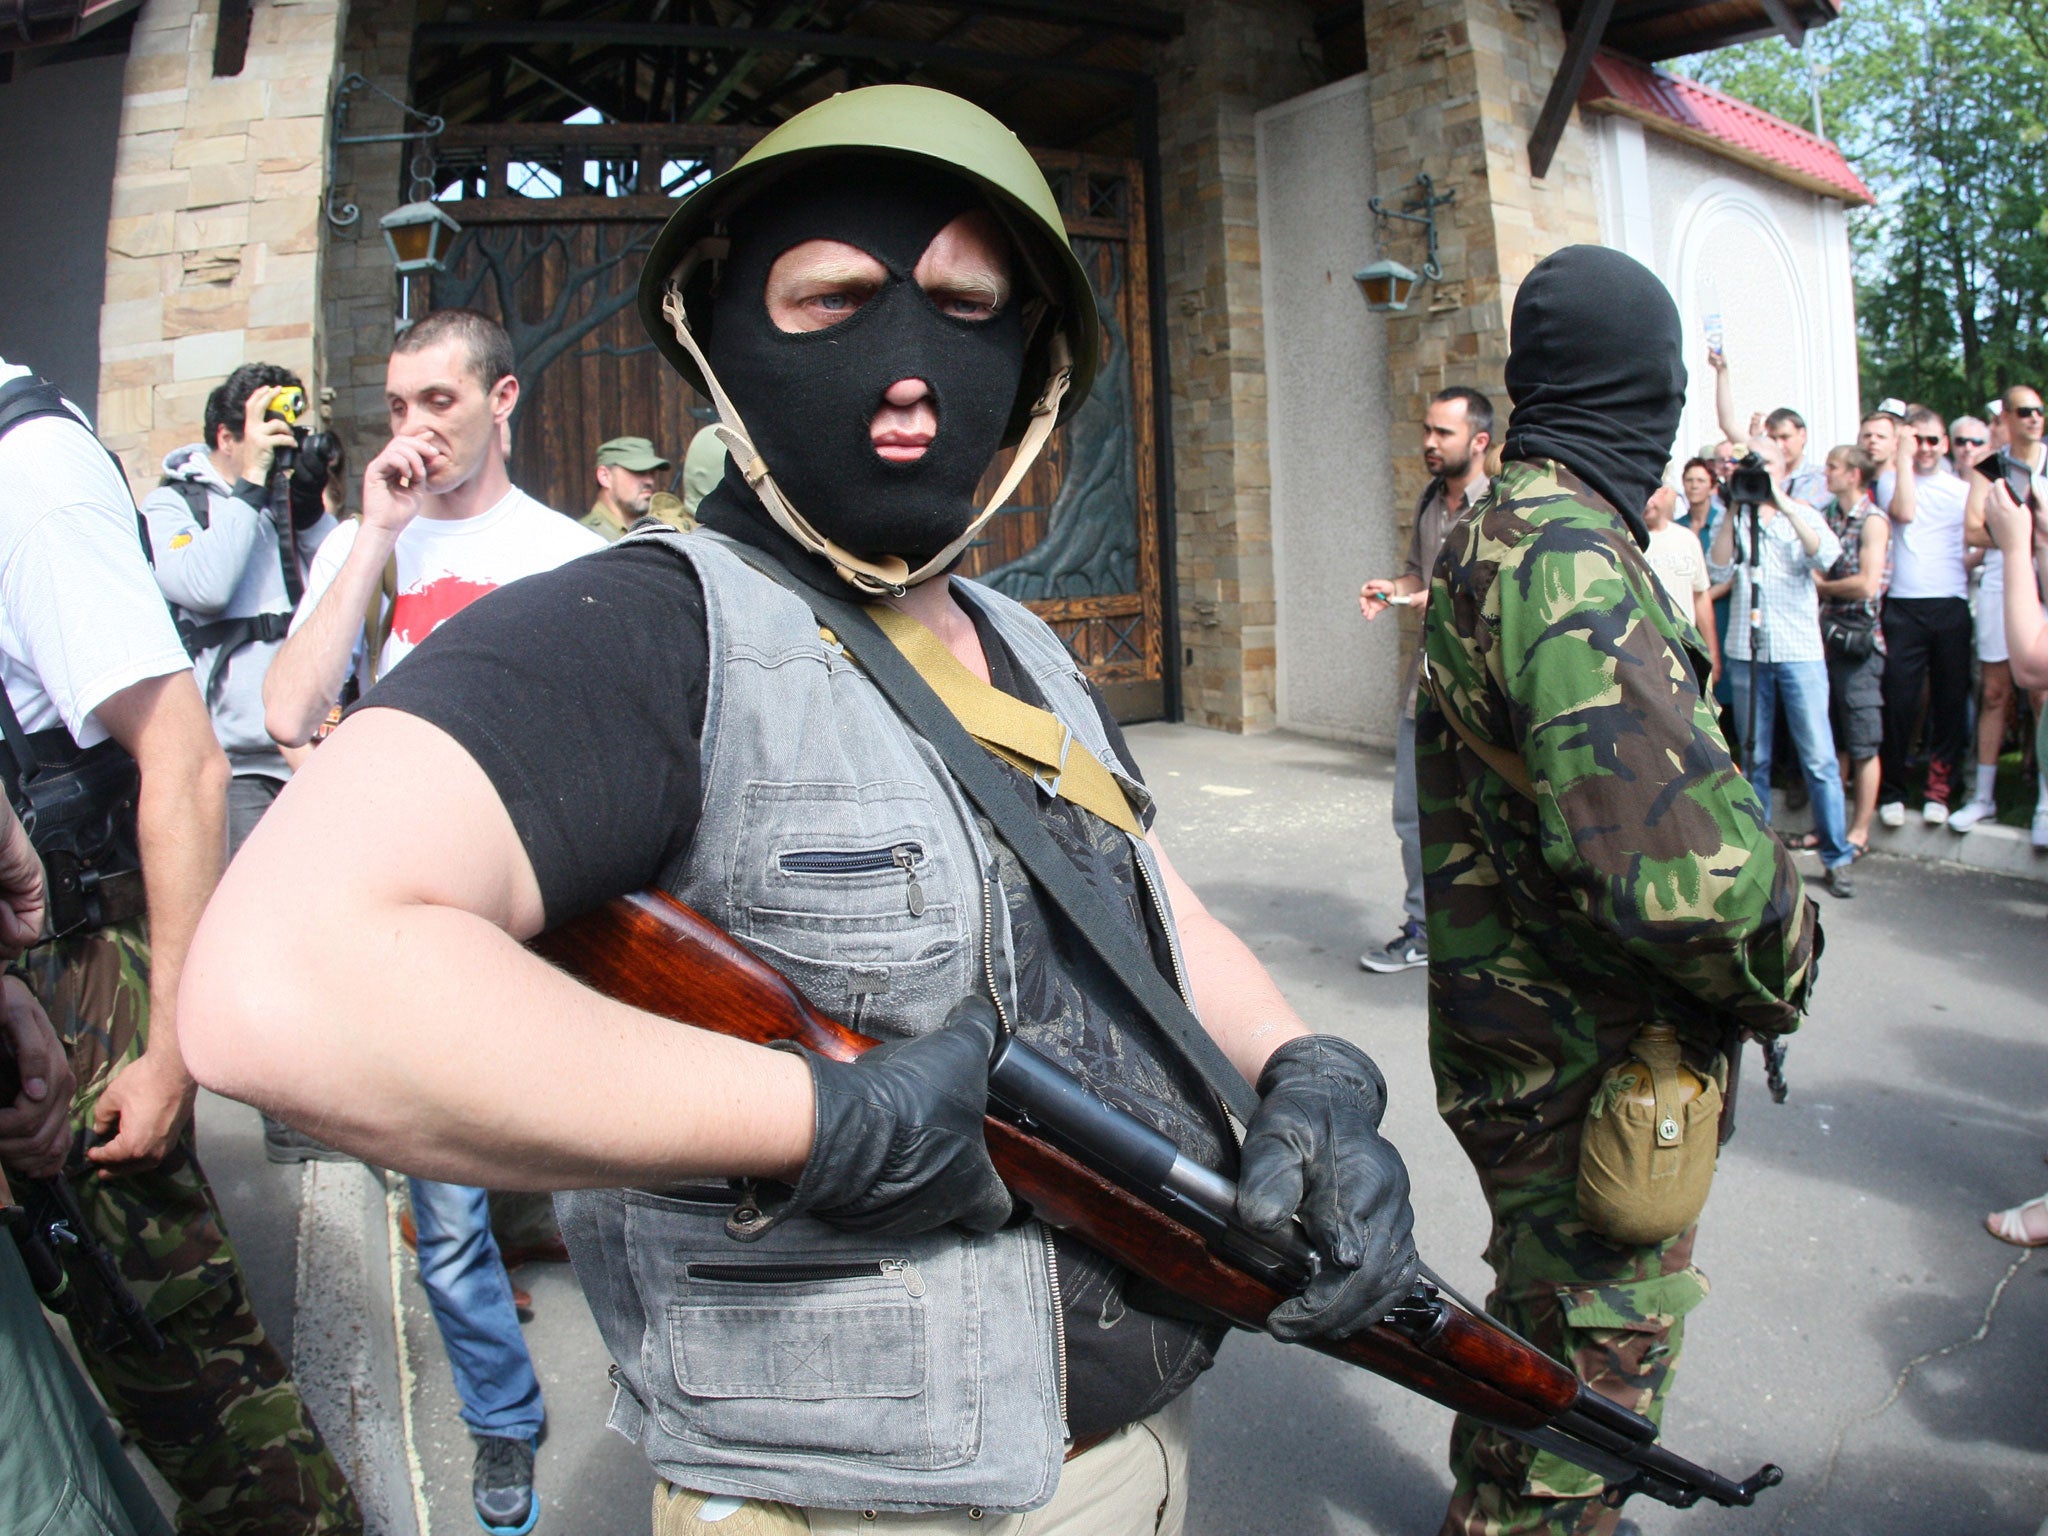 A number of the protestors were armed with Kalashnikovs